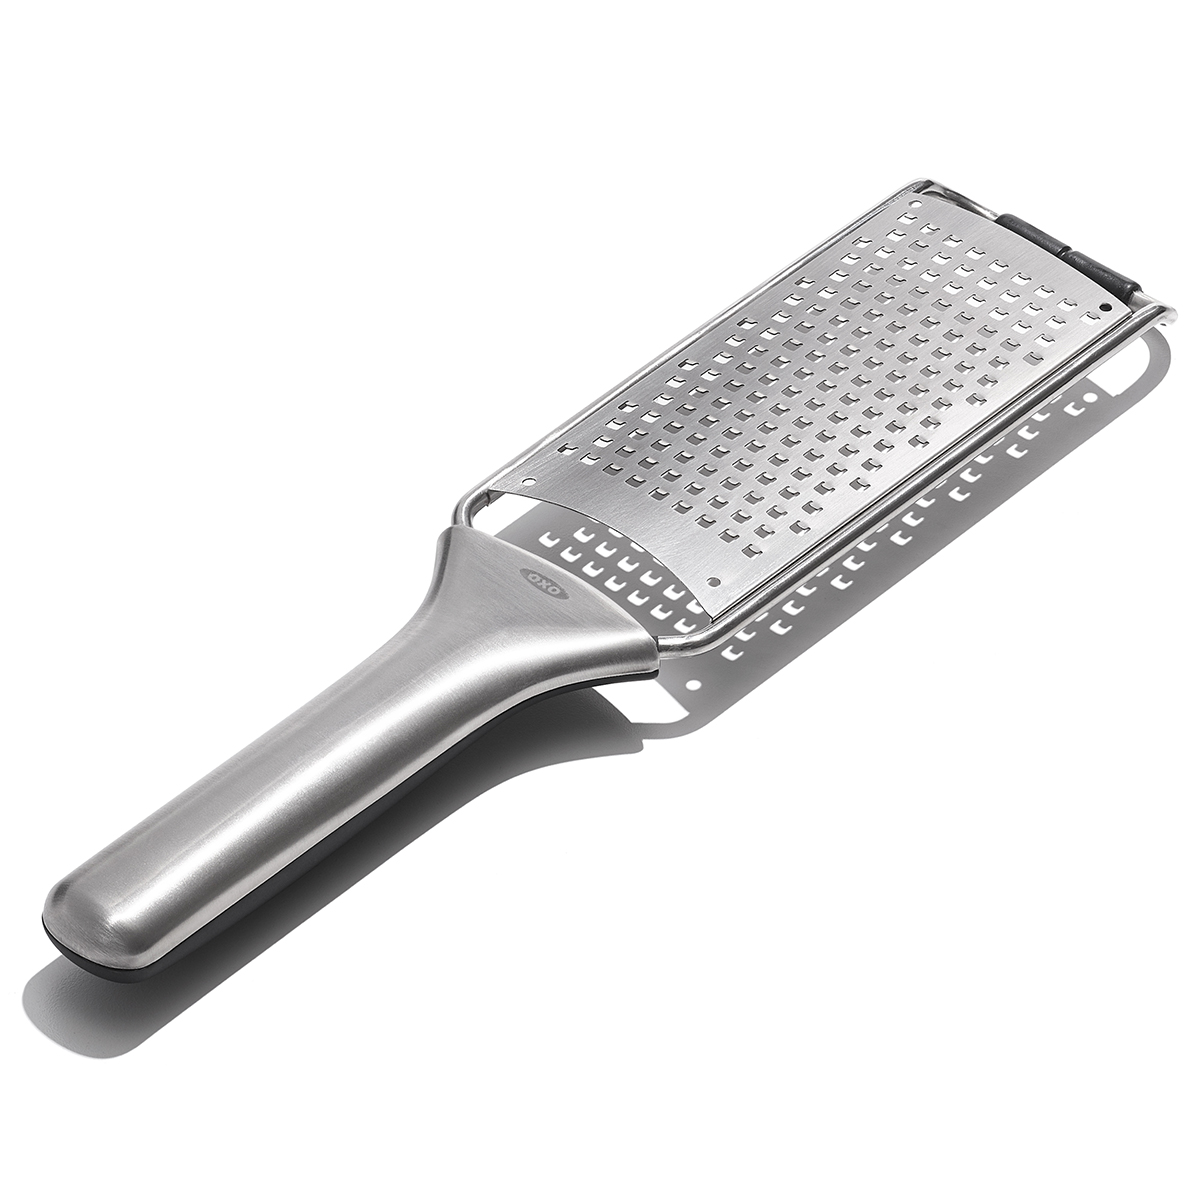 https://www.containerstore.com/catalogimages/425046/10086171-OXO-Steel-Grater-VEN1.jpg